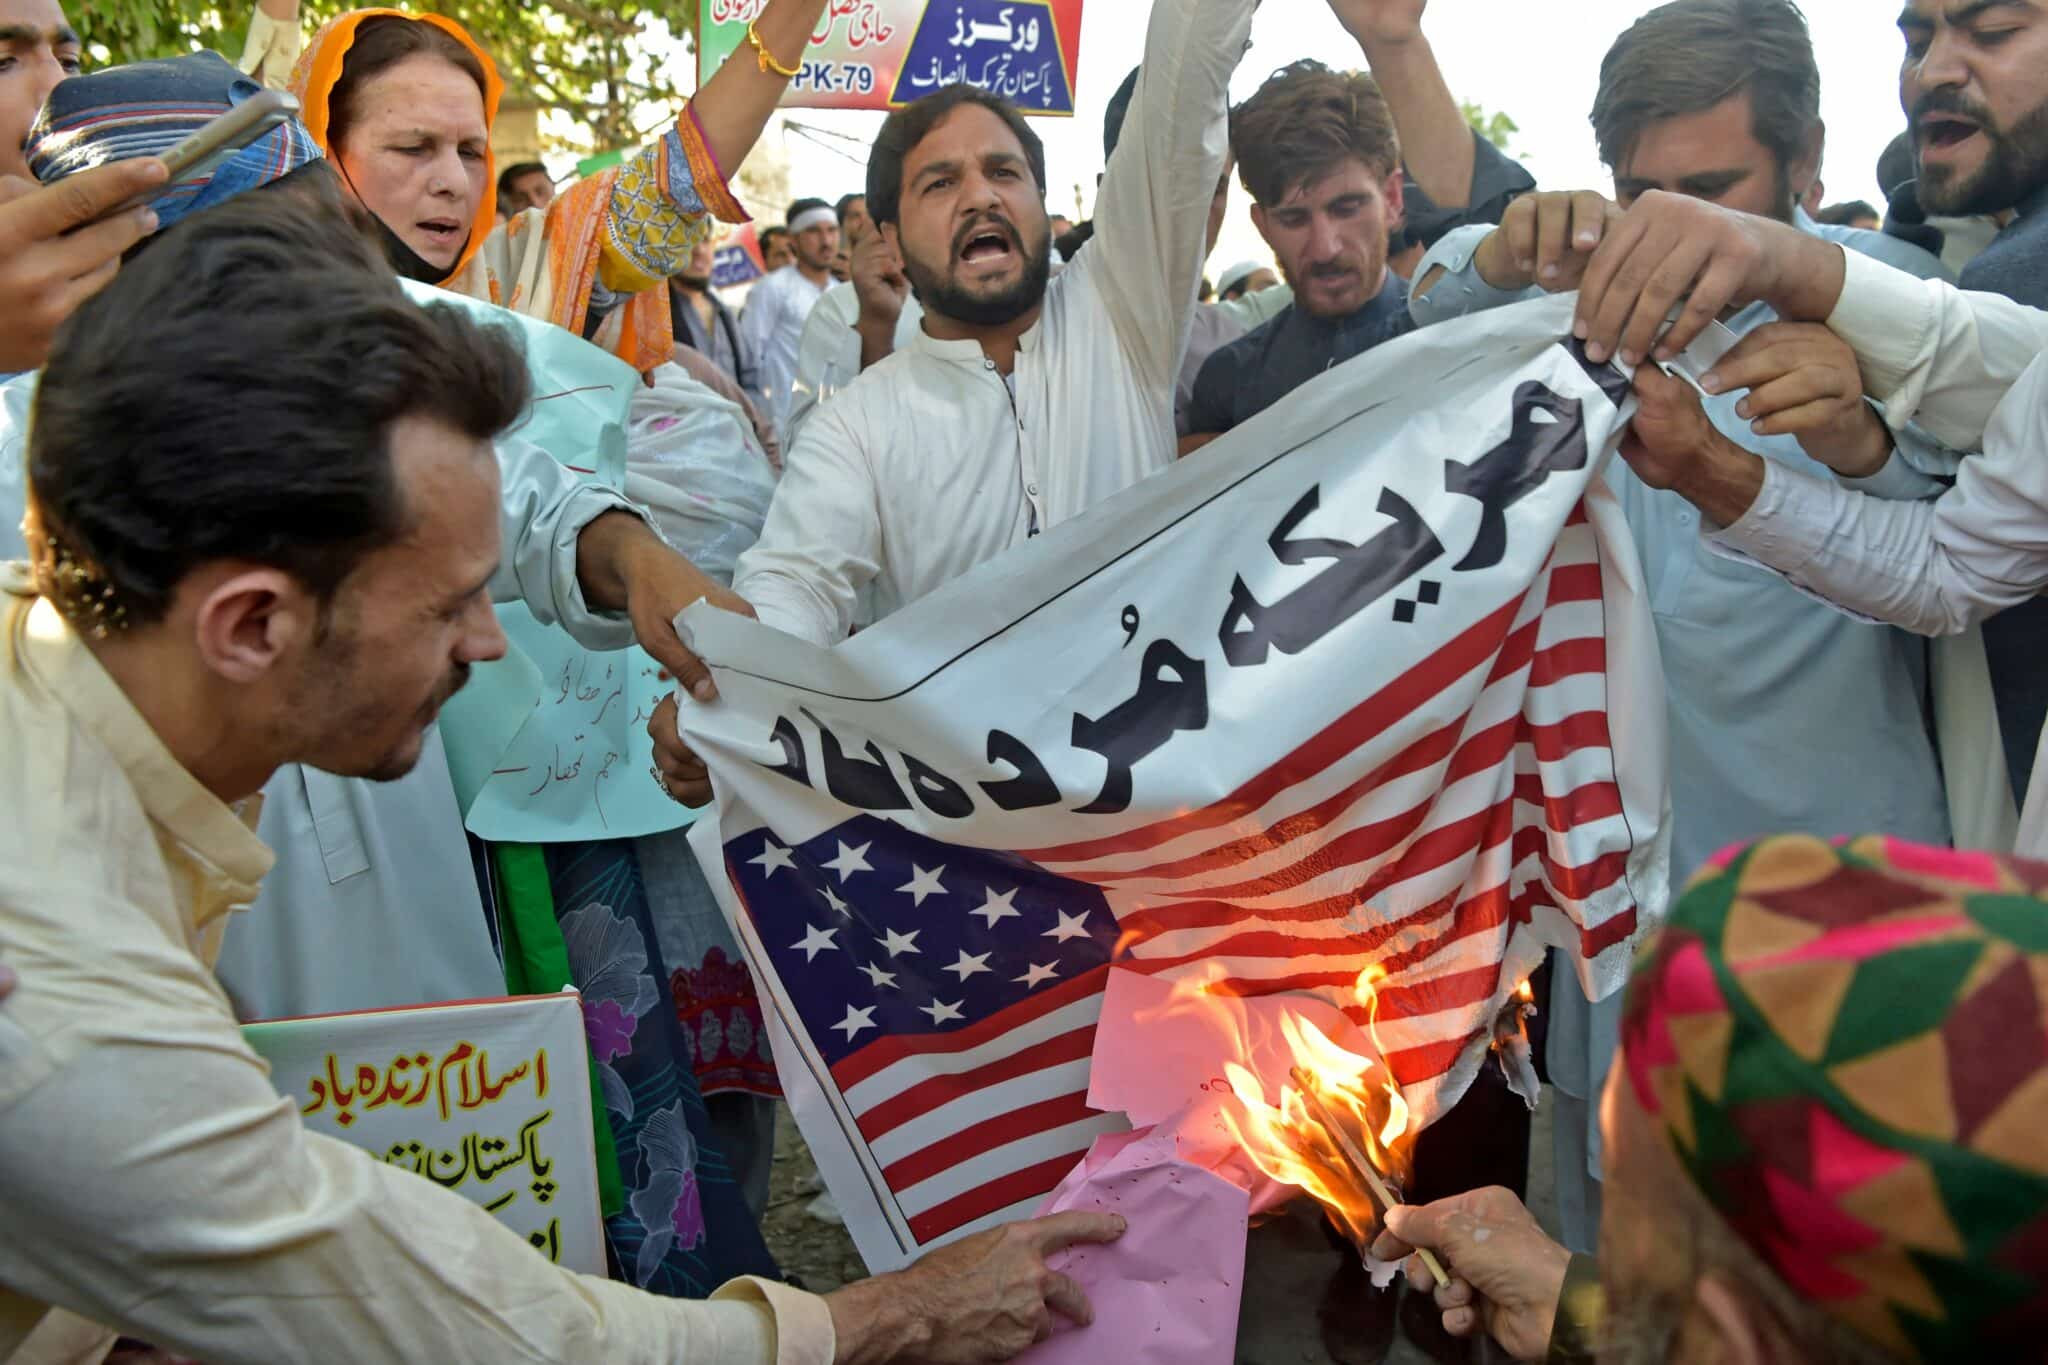 Supporters of ruling Pakistan Tehreek-e-Insaf (PTI) party burn a US national flag during an anti-US protest in Peshawar on April 1, 2022. - Pakistan's Prime Minister Imran Khan on March 31 accused the United States of meddling in Pakistan's politics  -- a claim quickly denied by Washington -- as a debate on a no-confidence motion against him in parliament was postponed. (Photo by Abdul MAJEED / AFP) (Photo by ABDUL MAJEED/AFP via Getty Images)